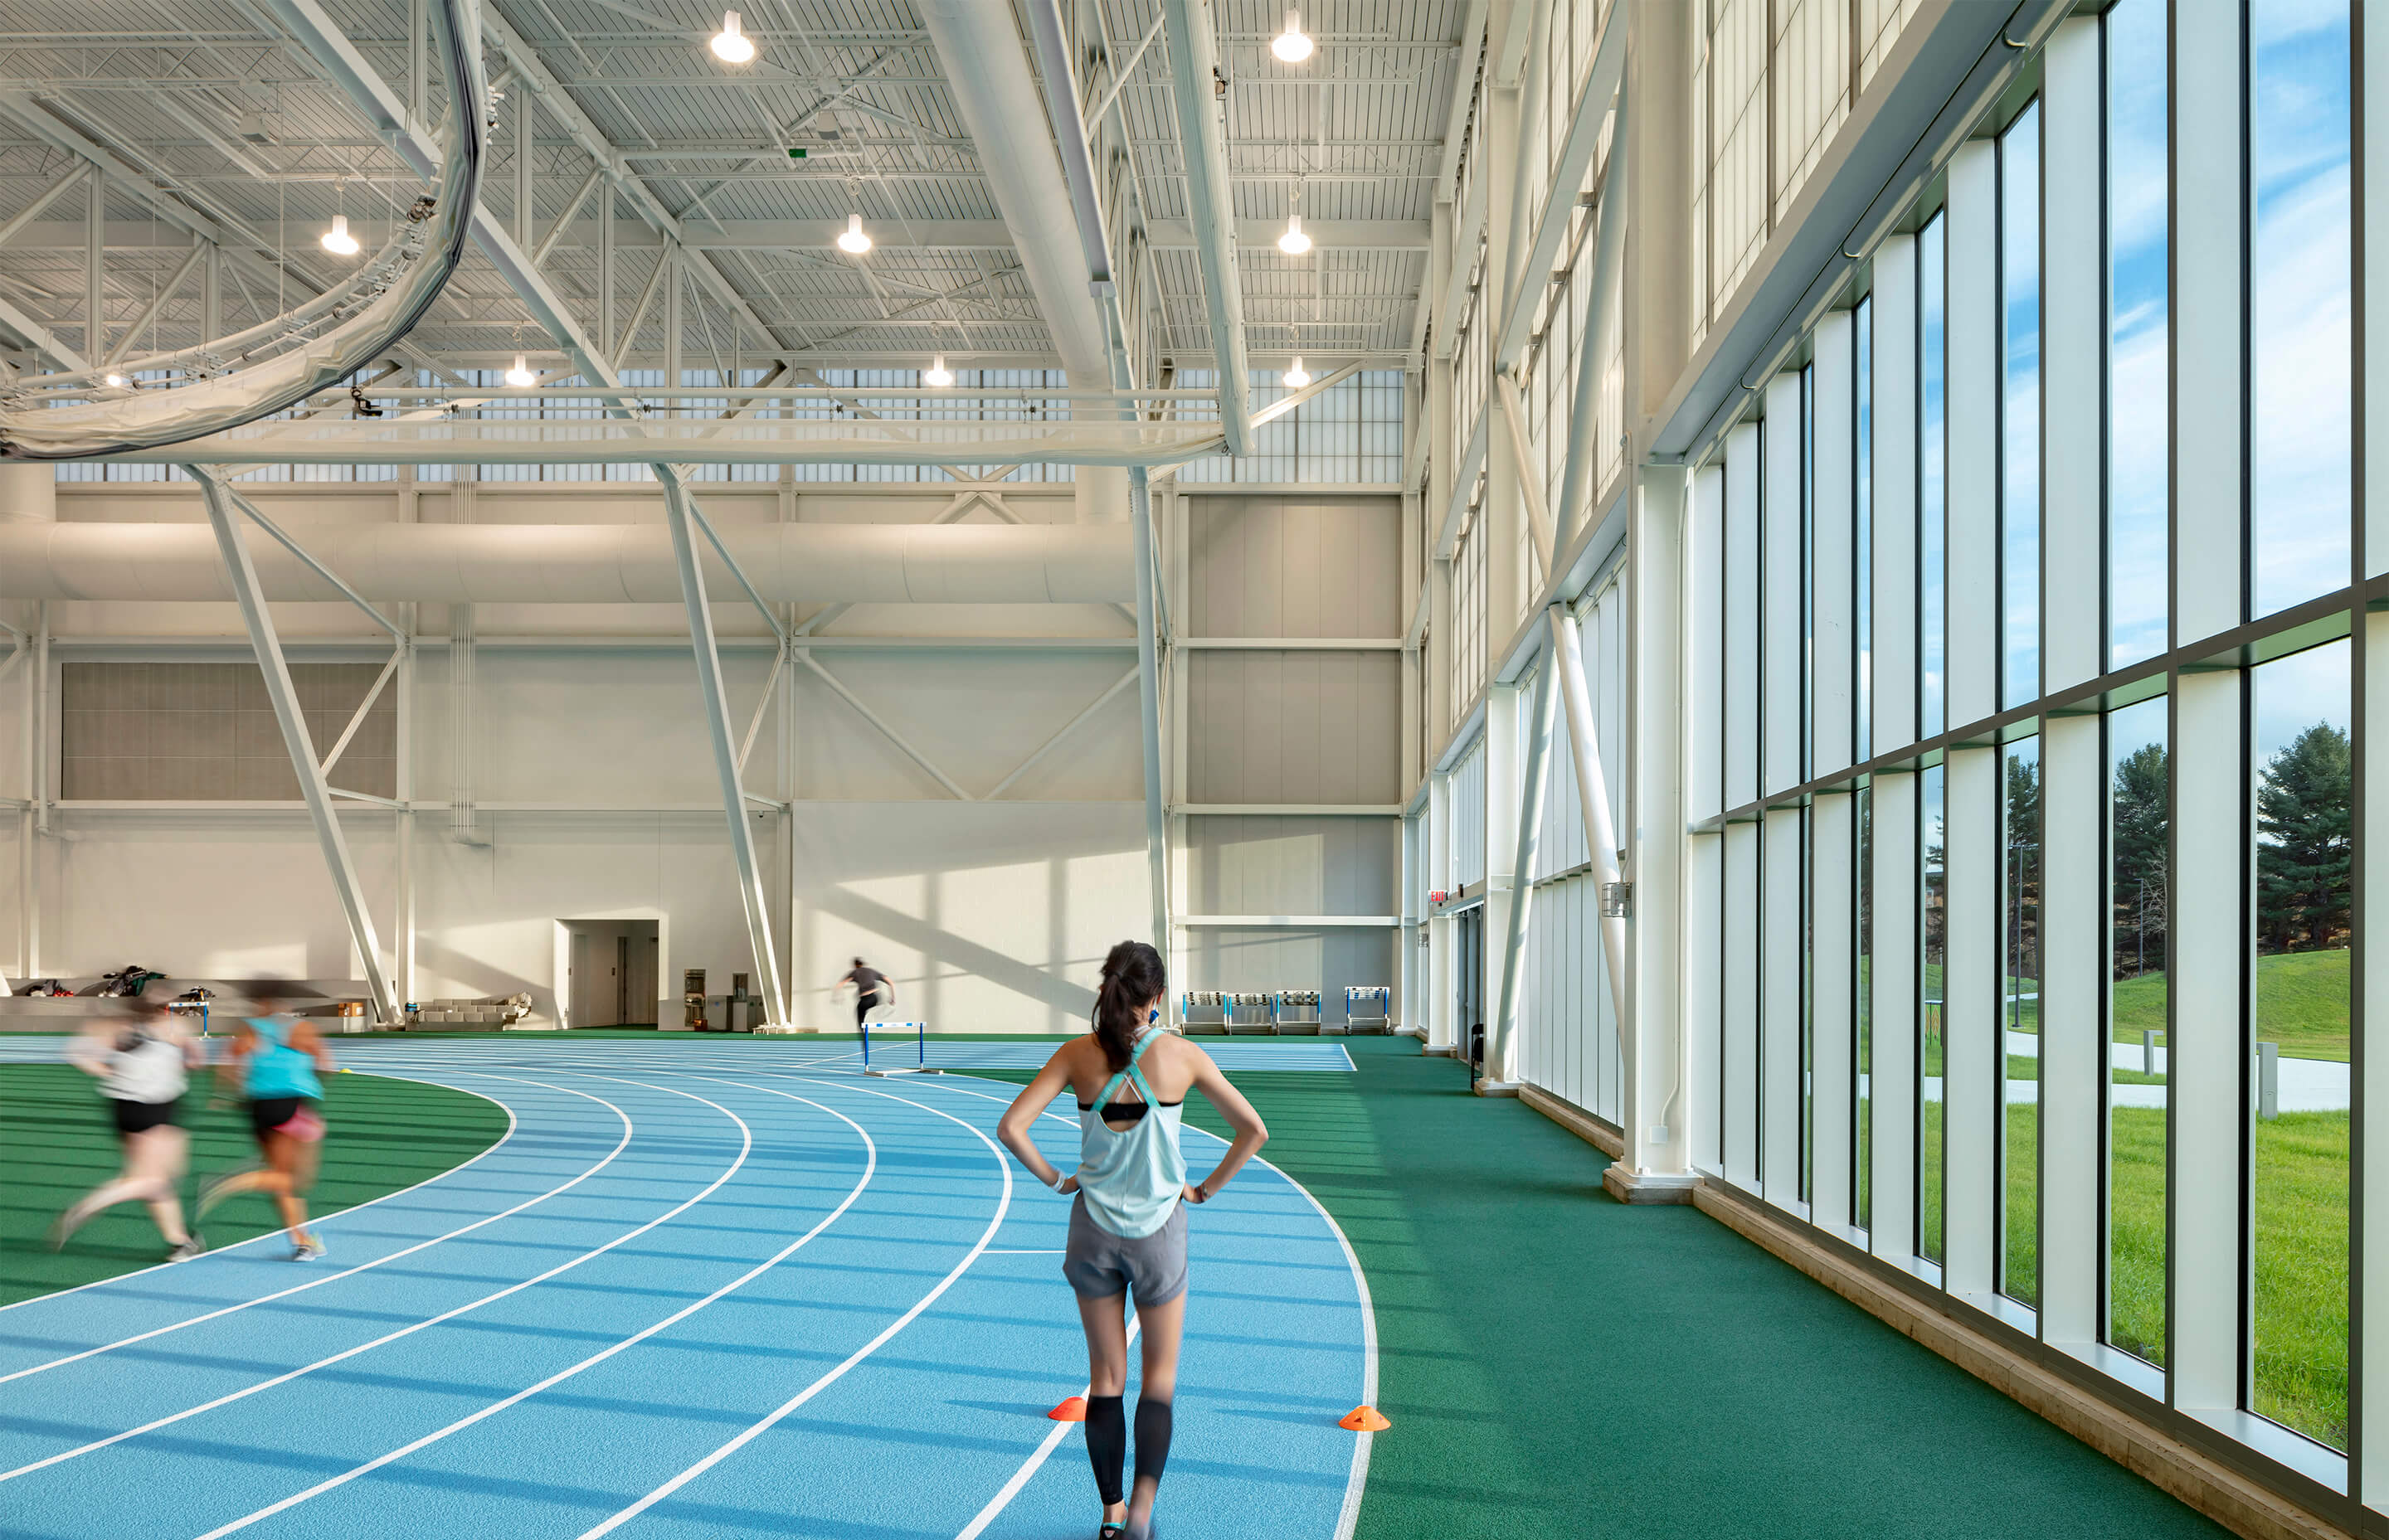 inside of an athletics center with glass walls